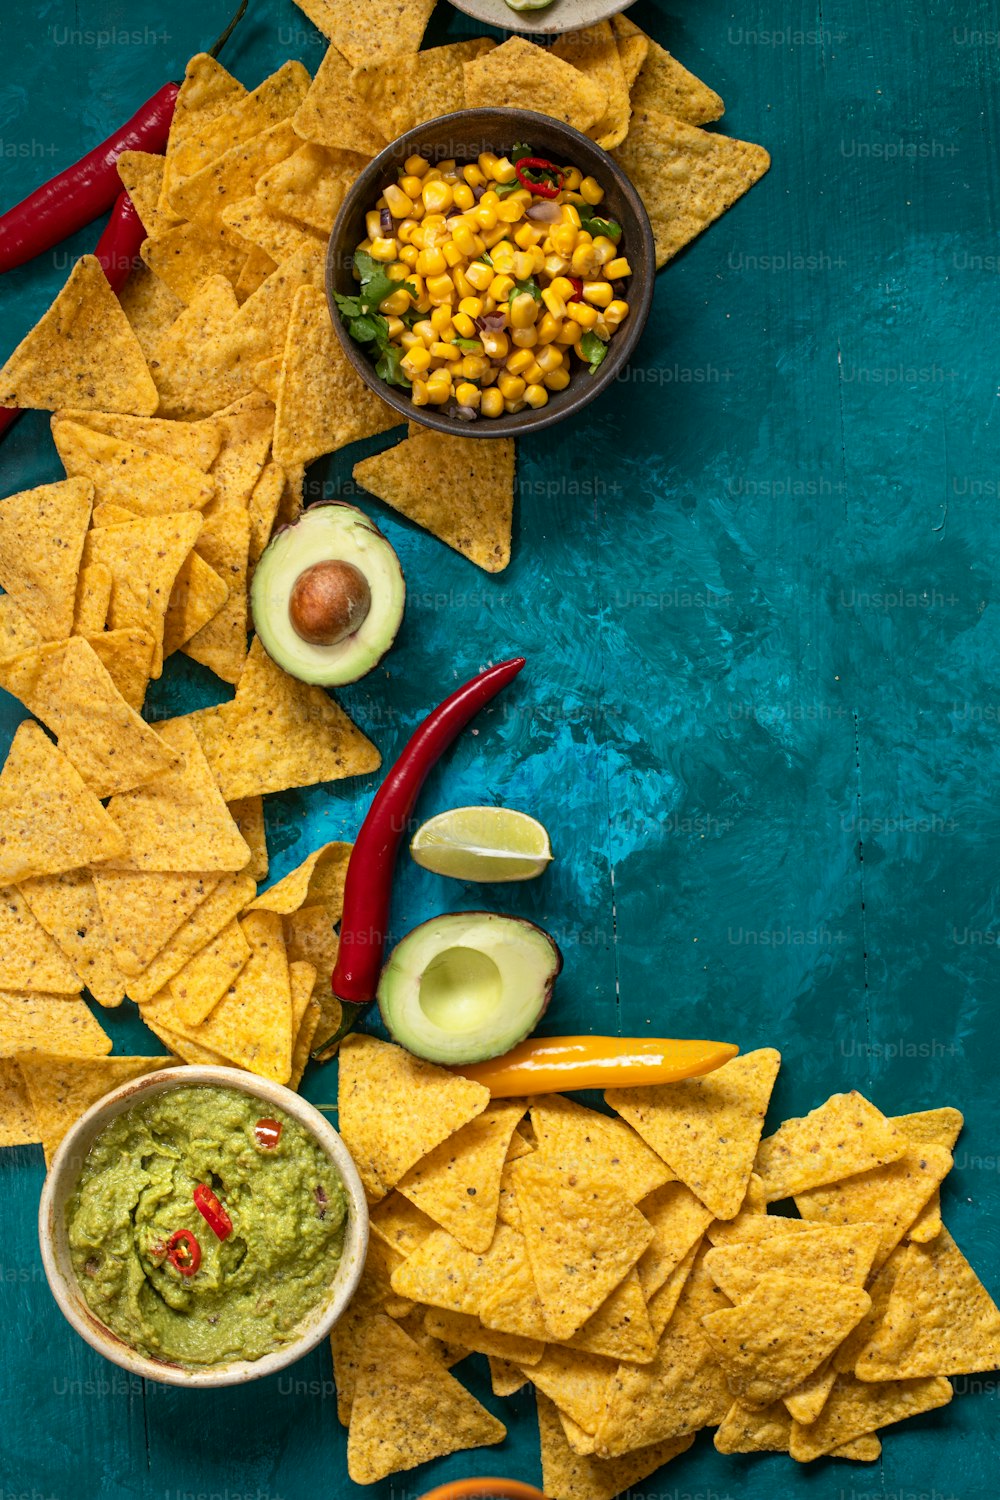 chips, guacamole, and salsa are arranged on a blue surface